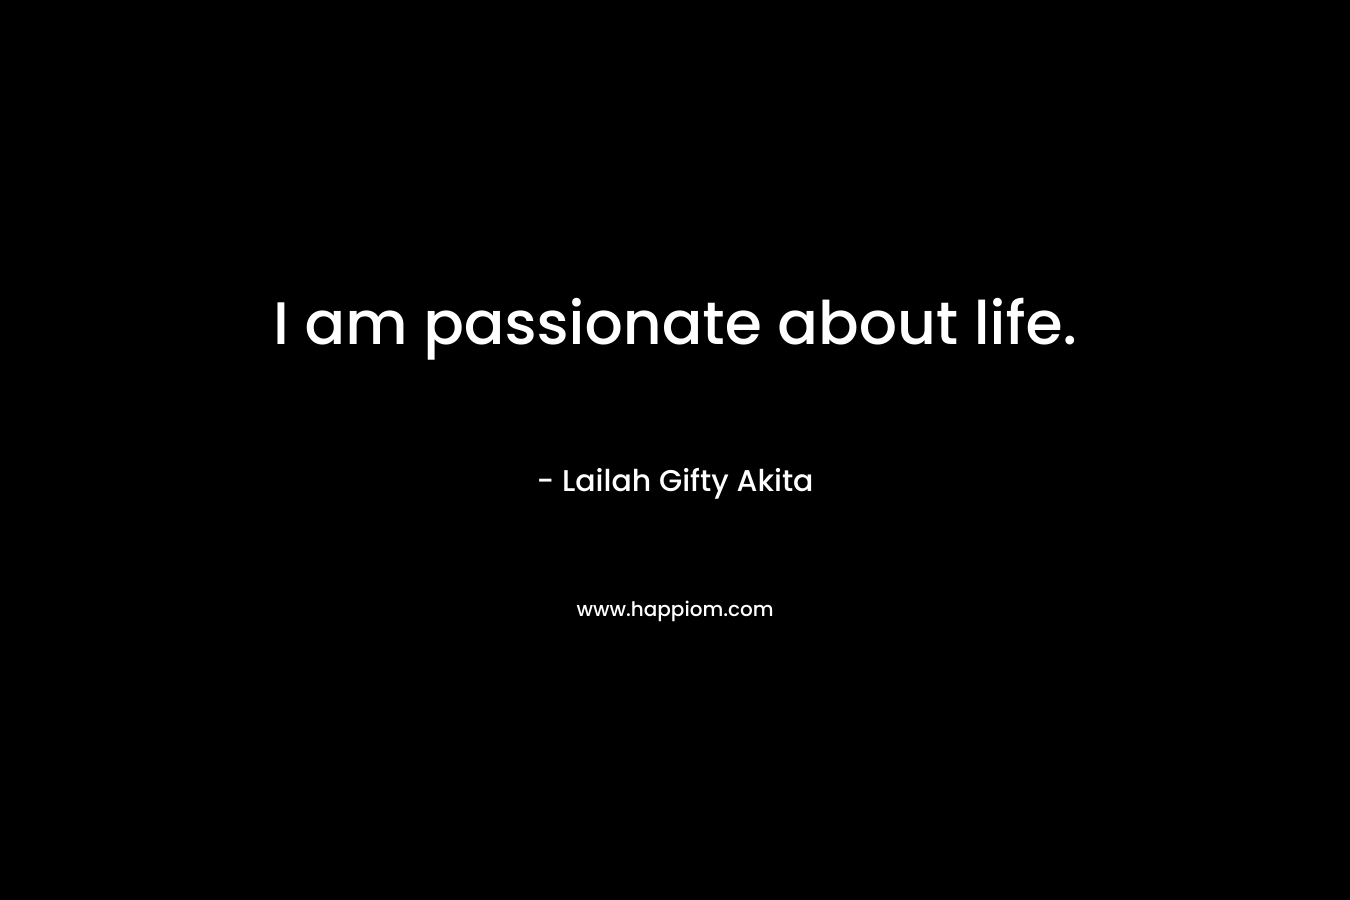 I am passionate about life.